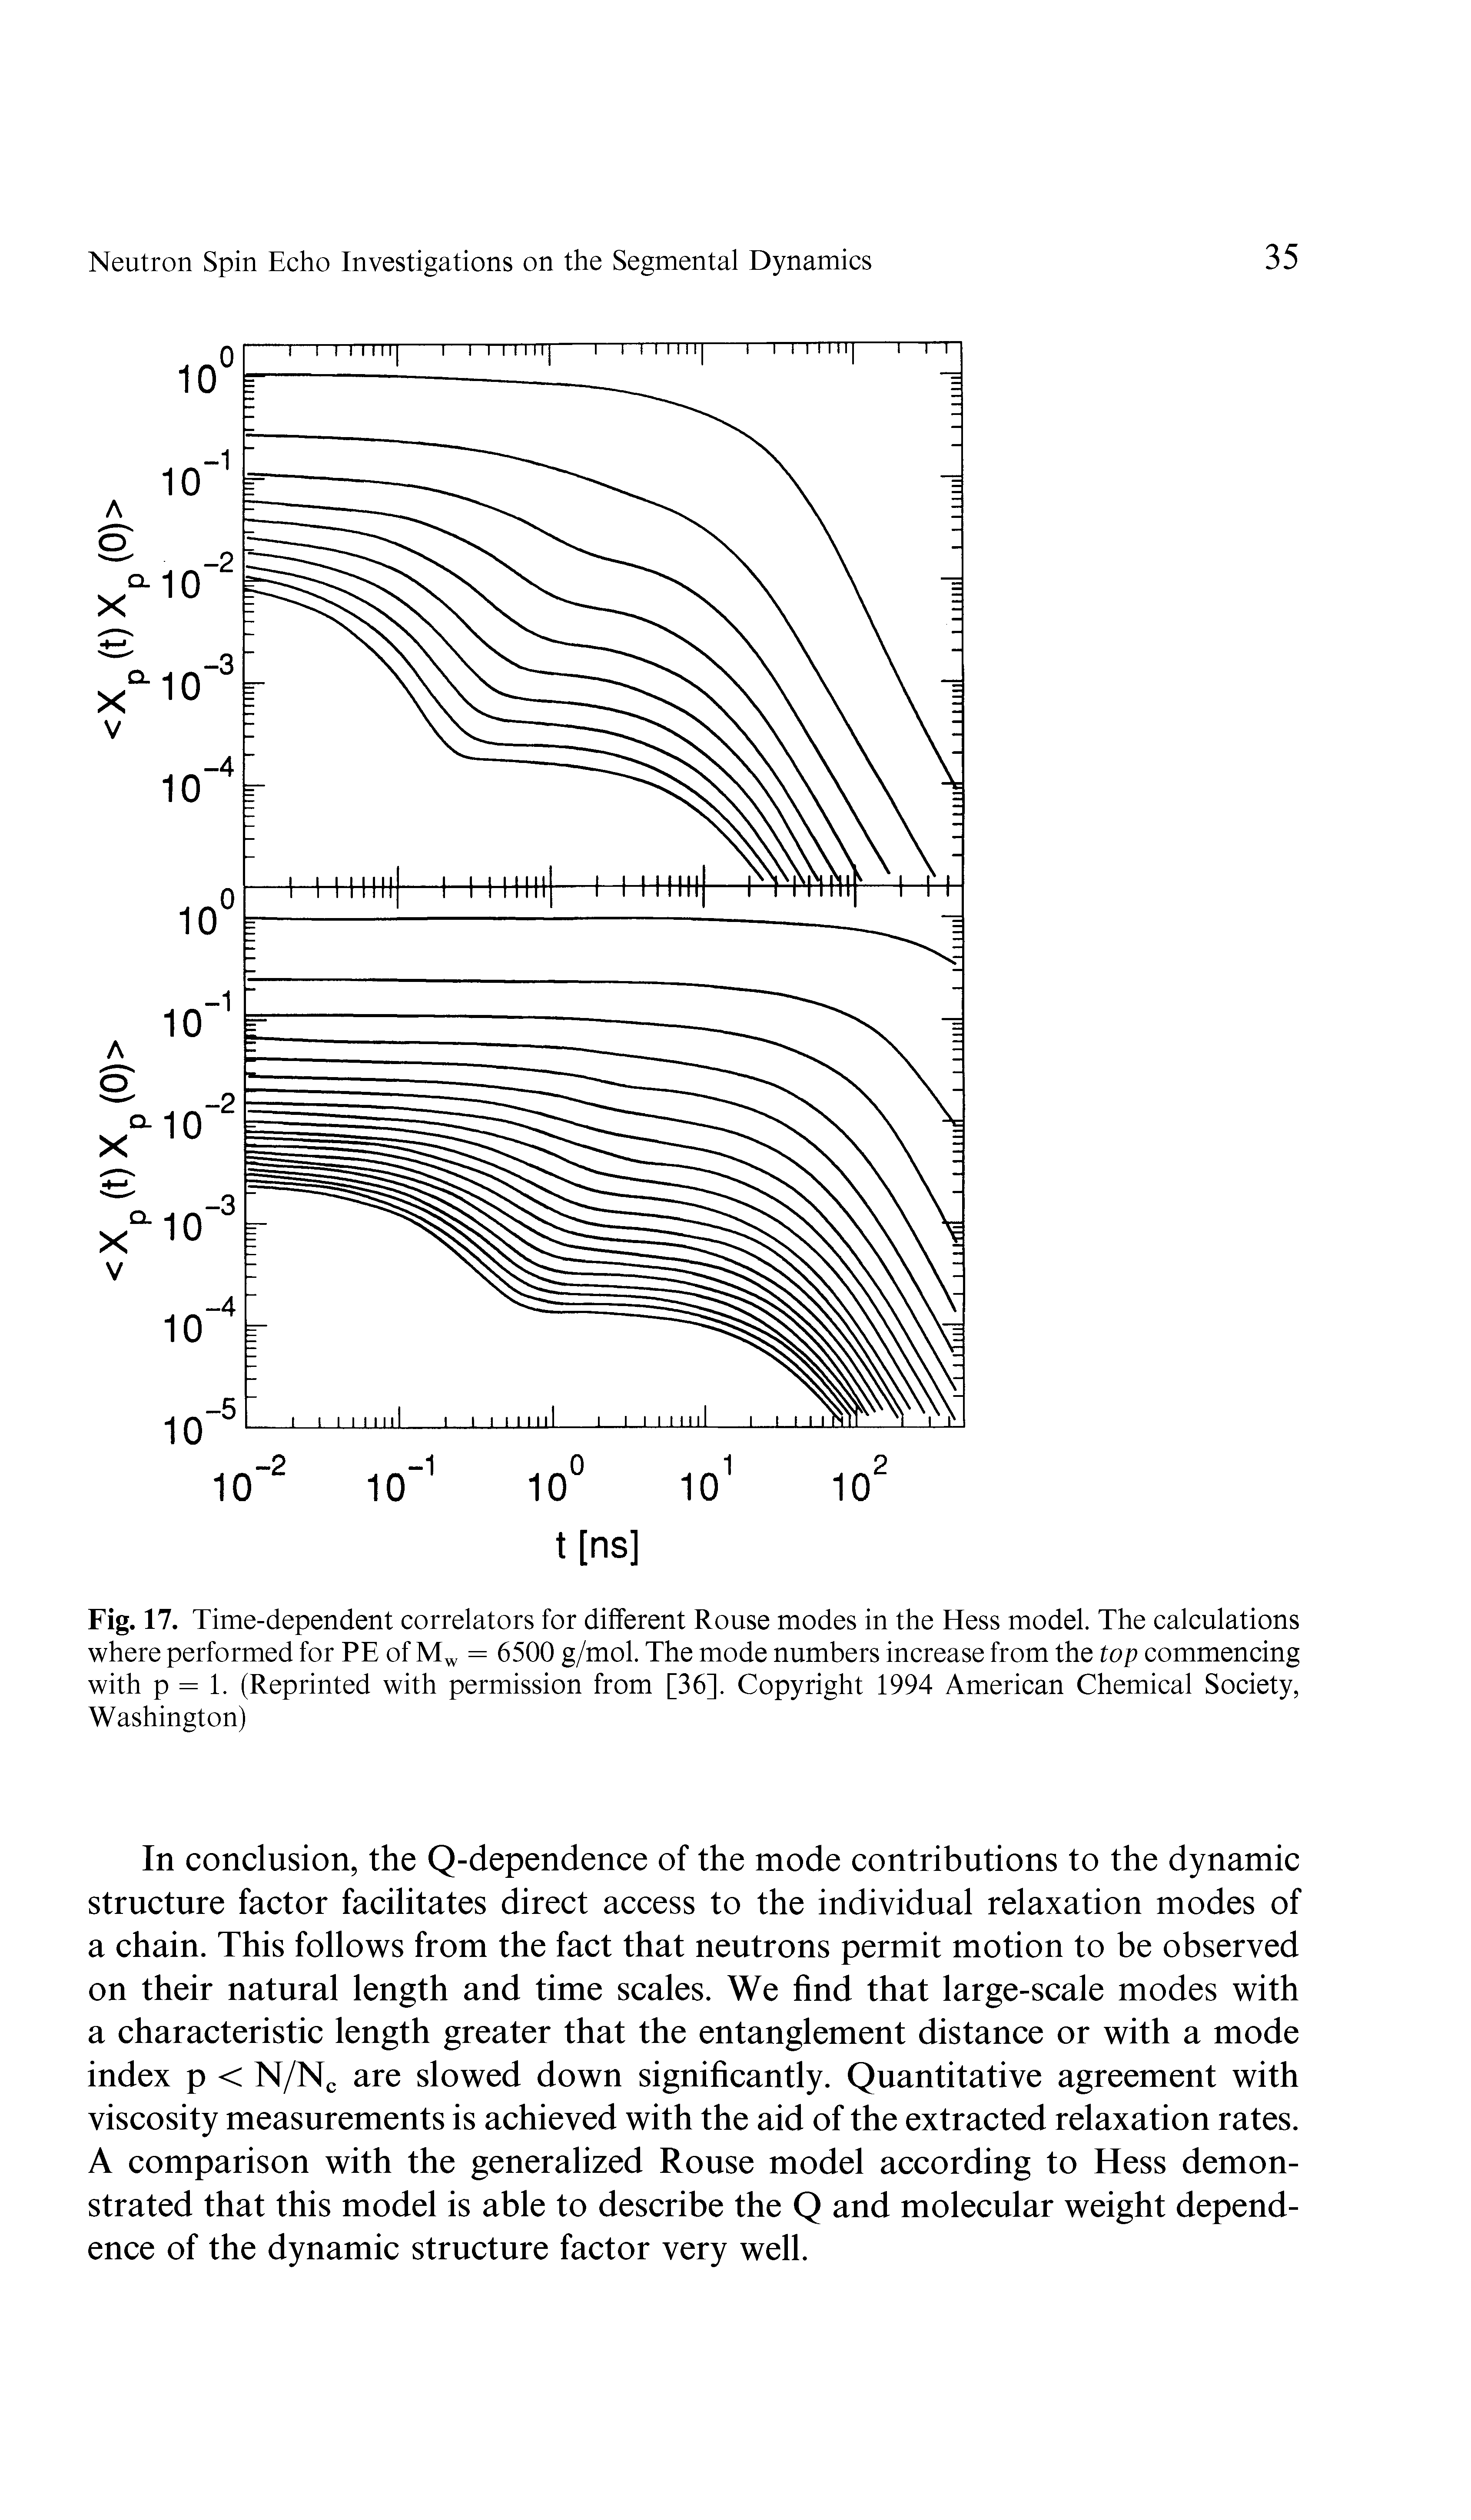 Fig. 17. Time-dependent correlators for different Rouse modes in the Hess model. The calculations where performed for PE of Mw = 6500 g/mol. The mode numbers increase from the top commencing with p = 1. (Reprinted with permission from [36]. Copyright 1994 American Chemical Society, Washington)...